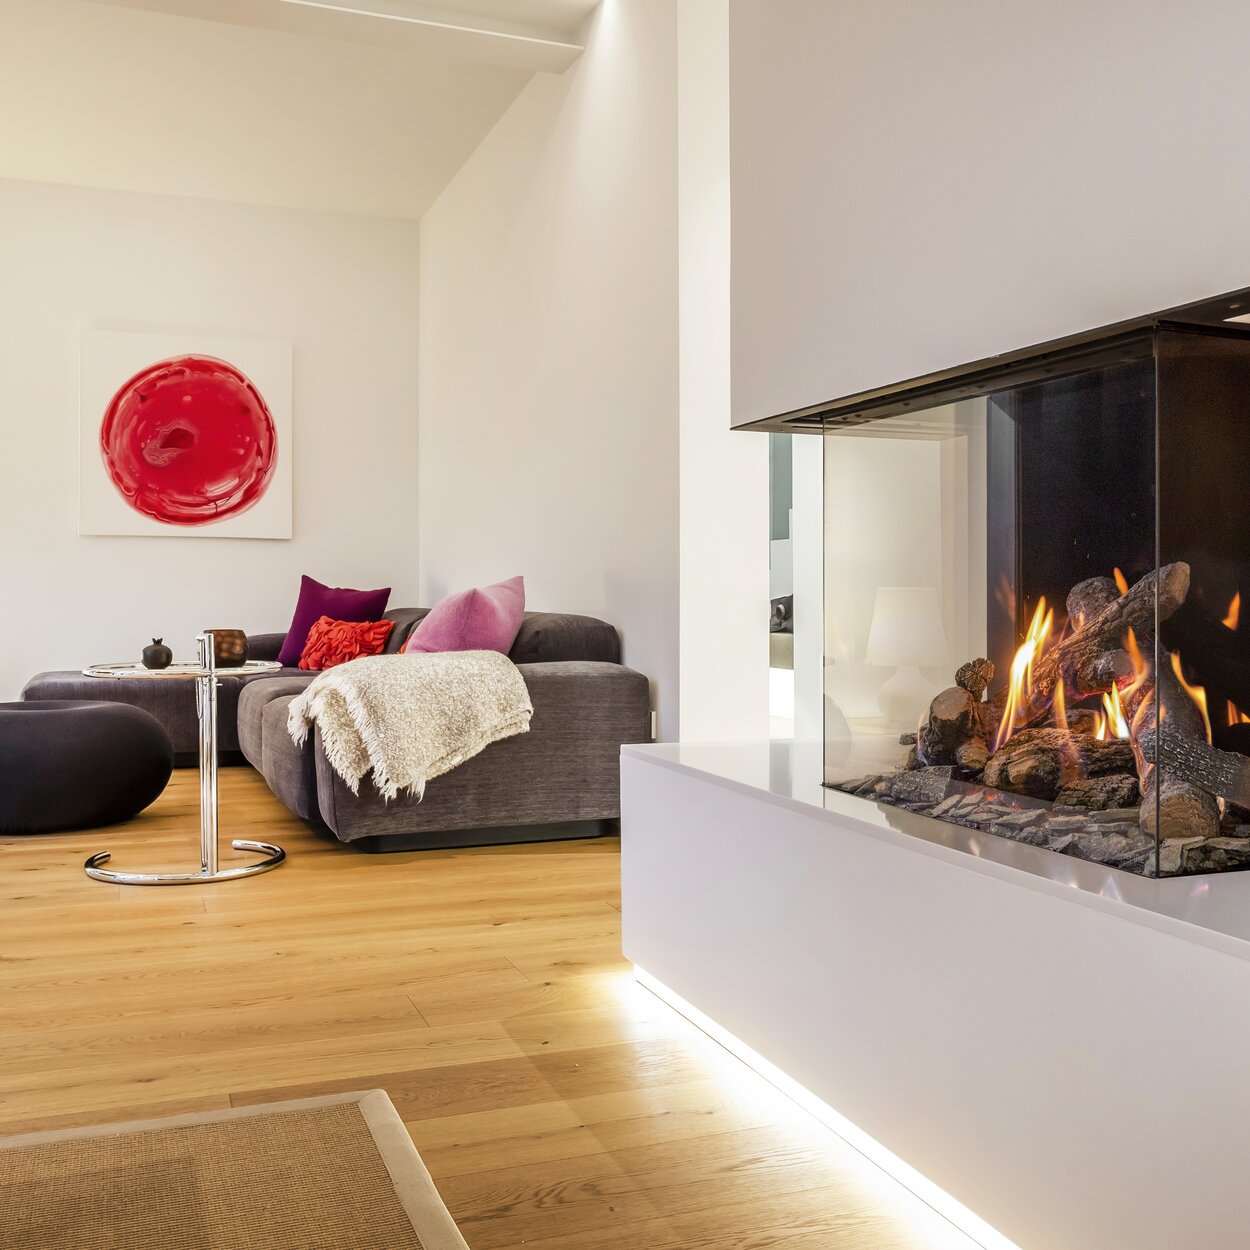 Gas fireplace GP70/55S glazed on 3-sided in bright living room with parquet floor built into white wall